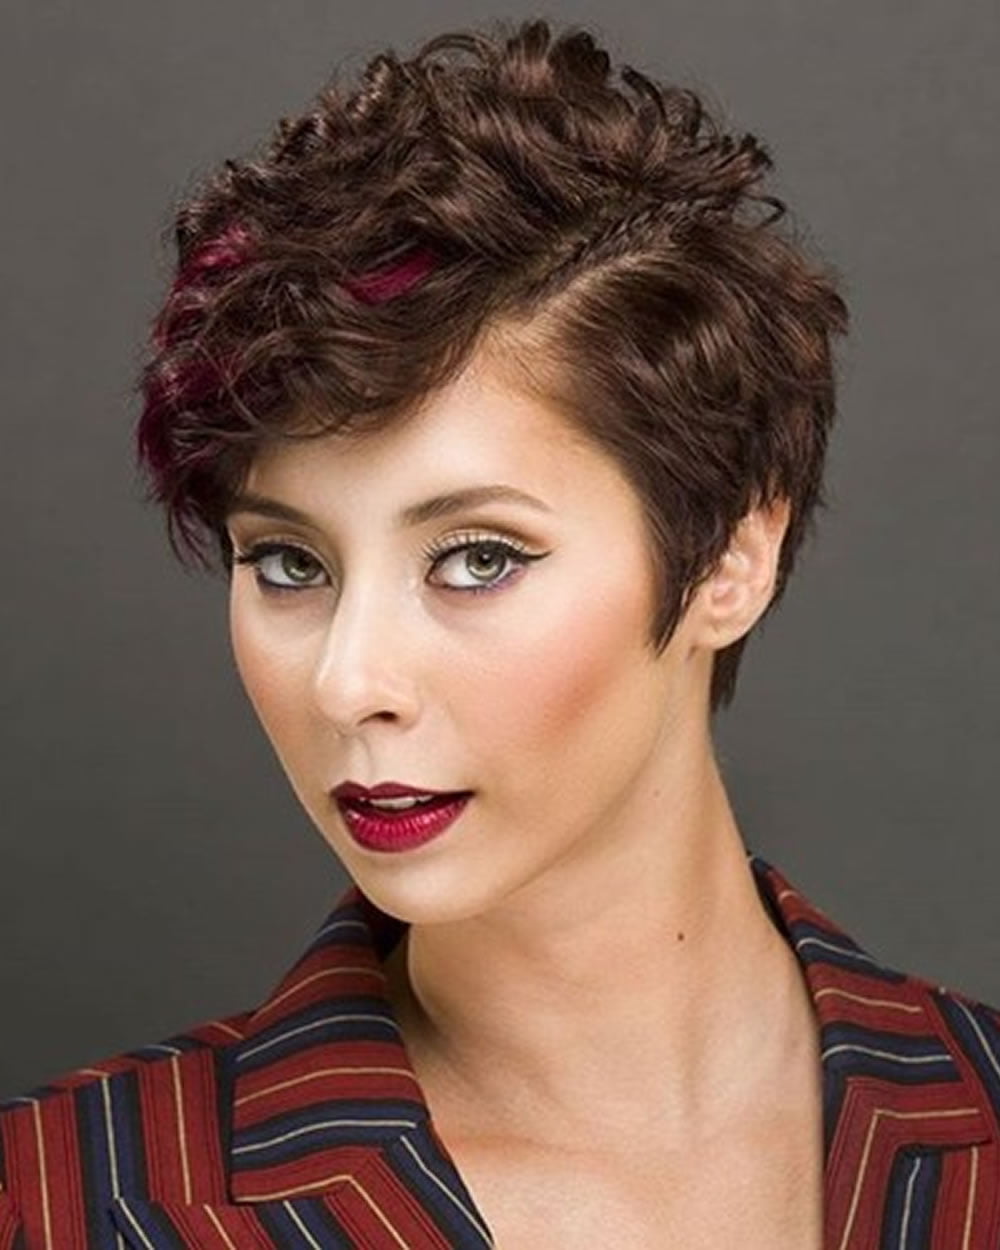 25 Latest Mixed 2018 Short Haircuts for Women : Bob+Pixie Styles - Page 2 - HAIRSTYLES